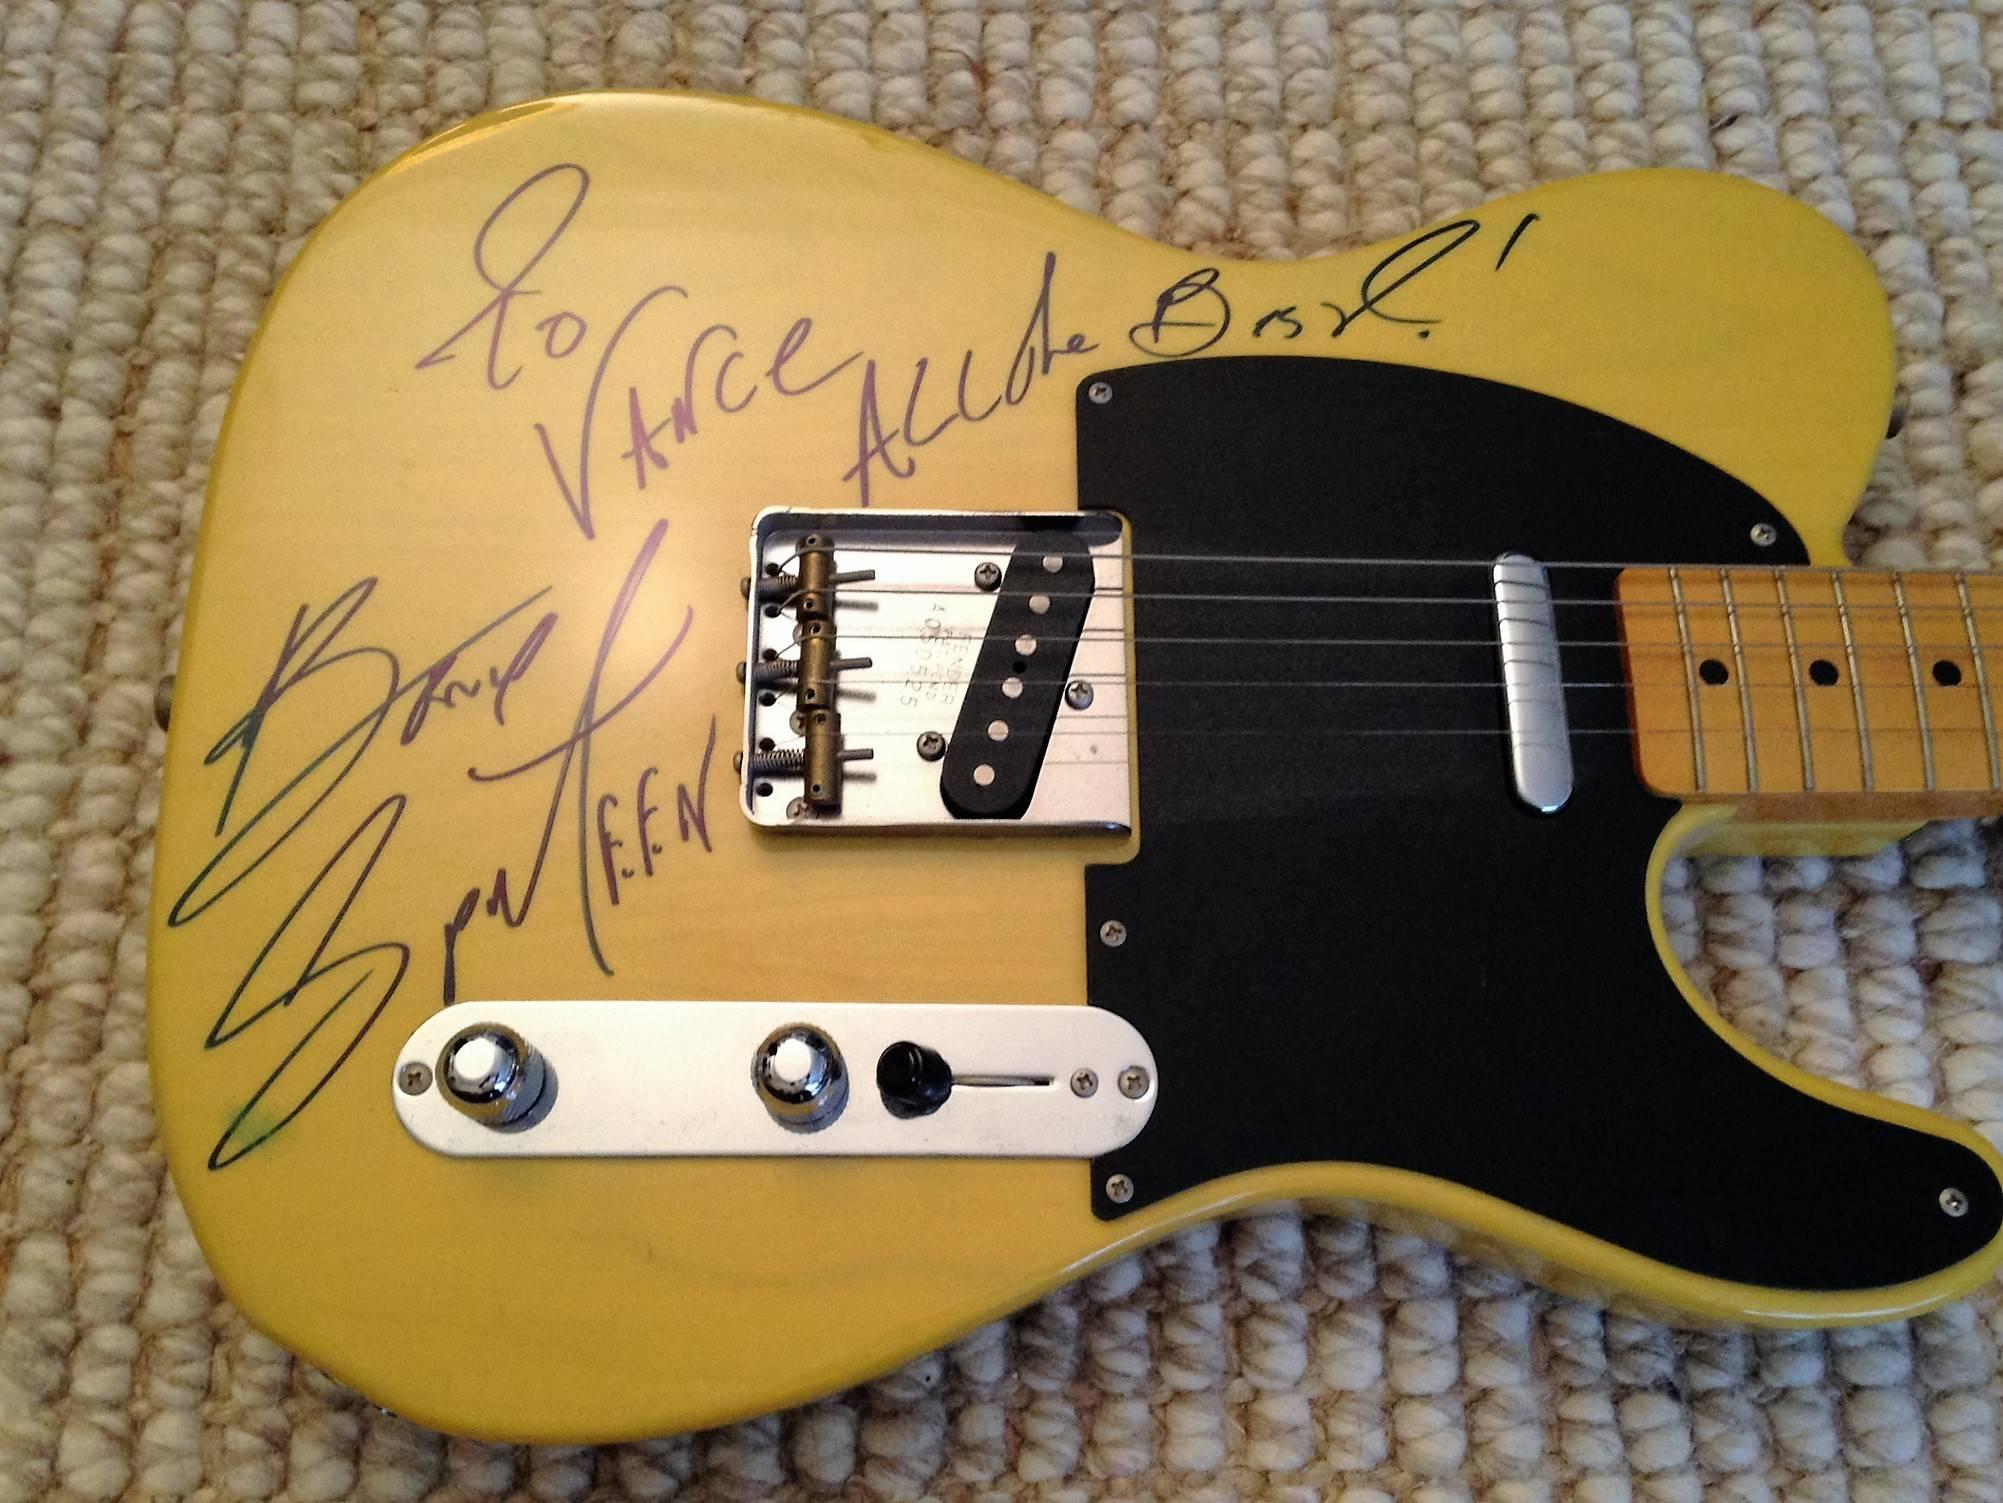 This is a Fender Telecaster, a Japanese reissue, circa 1992. Handsigned by Bruce Springsteen. He Wrote ' To Vance All The Best '. Guitar and Bruce's signature is excellent, a slight rub at the bottom of his S. If you would like the personalization